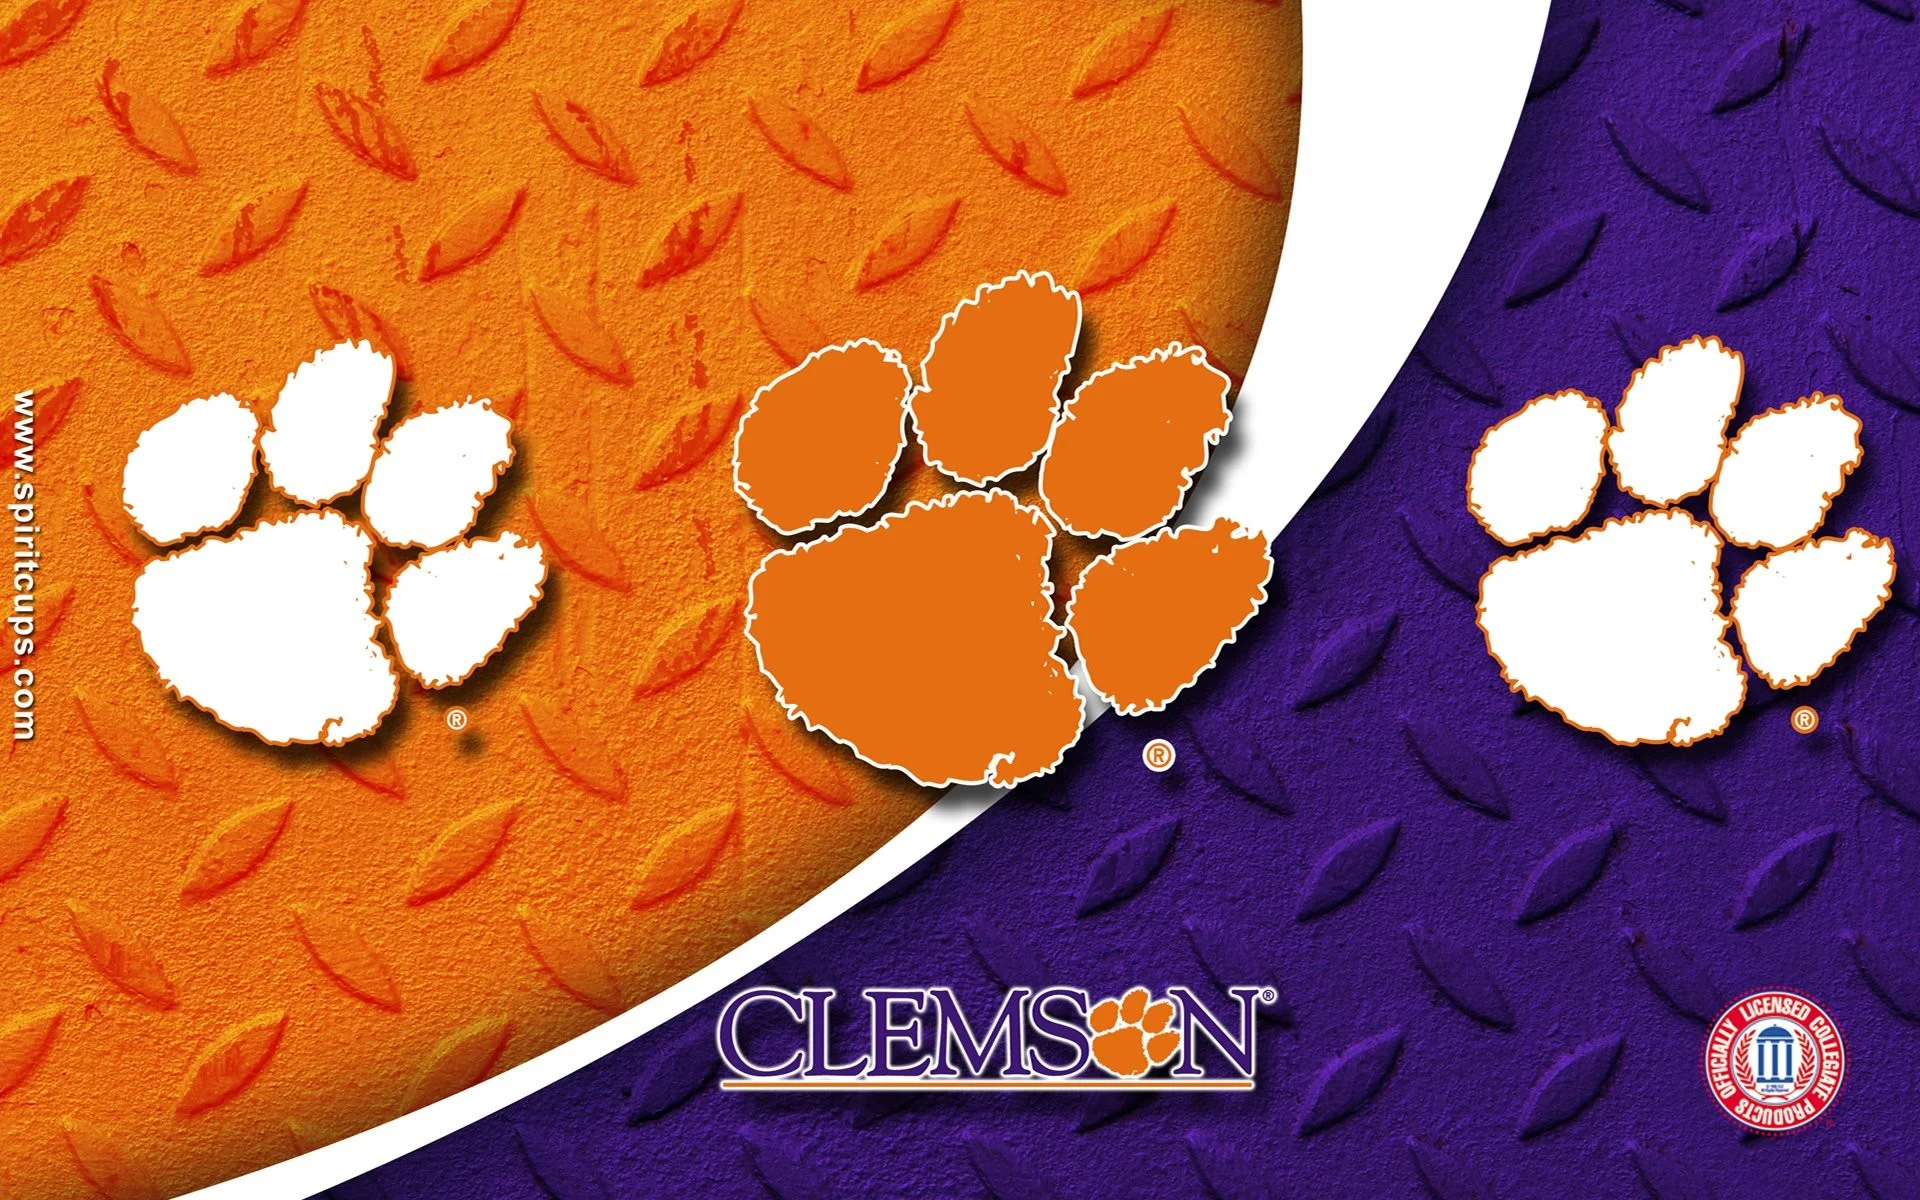 315 Clemson Tigers Helmet Stock Photos HighRes Pictures and Images   Getty Images